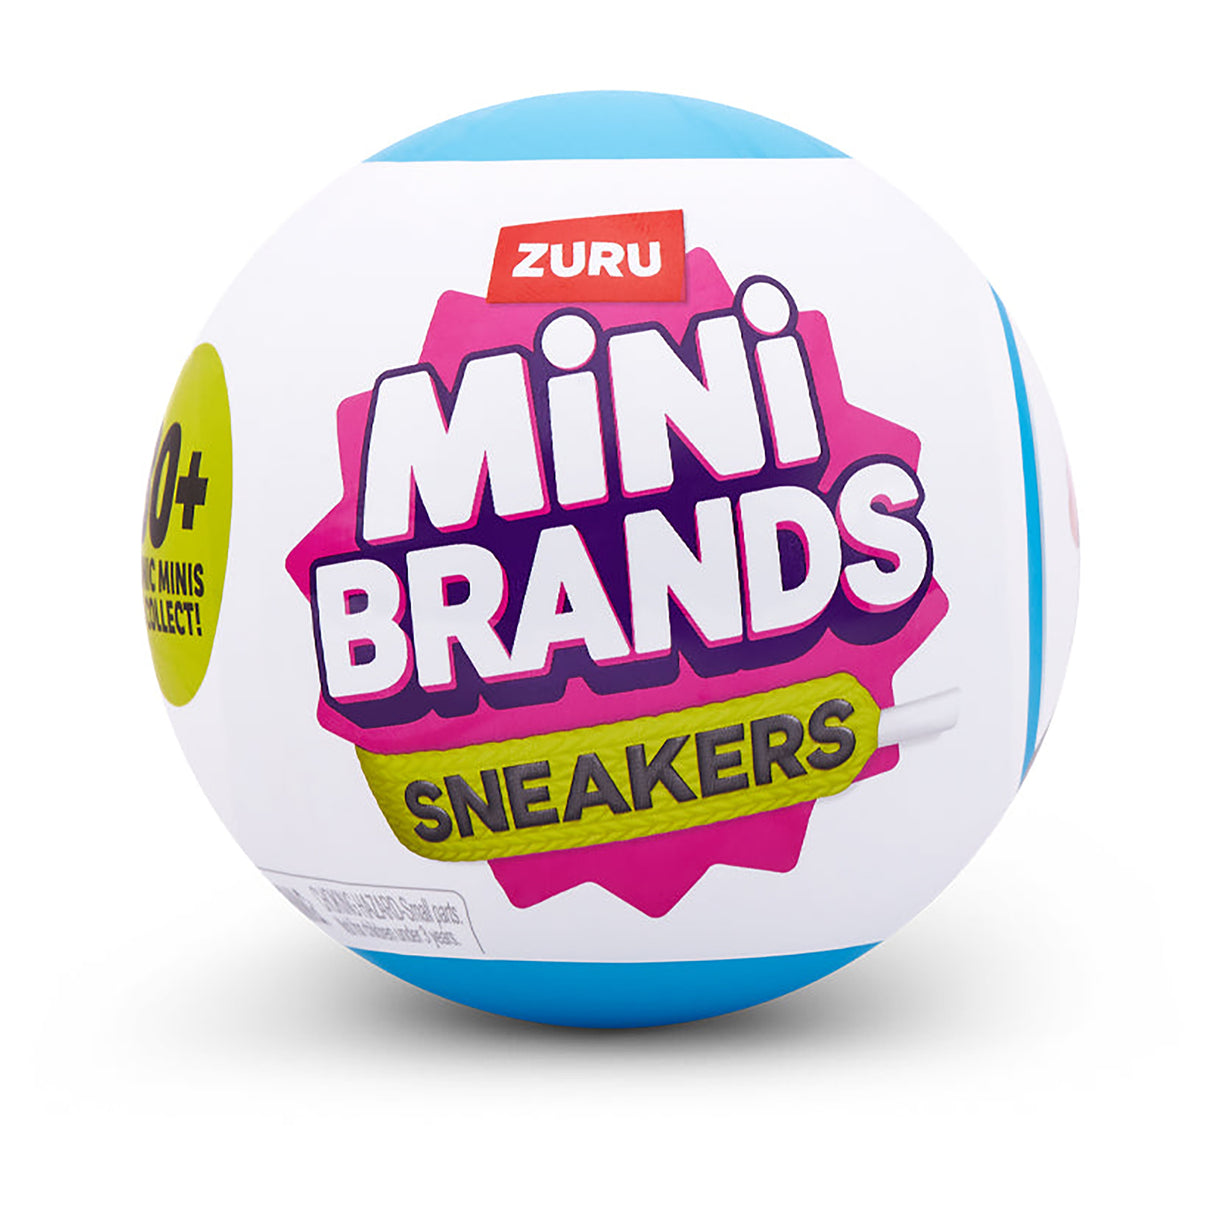 NEW* Series 3 Unboxing SNEAKERS MINI BRANDS- TINY REAL Rare